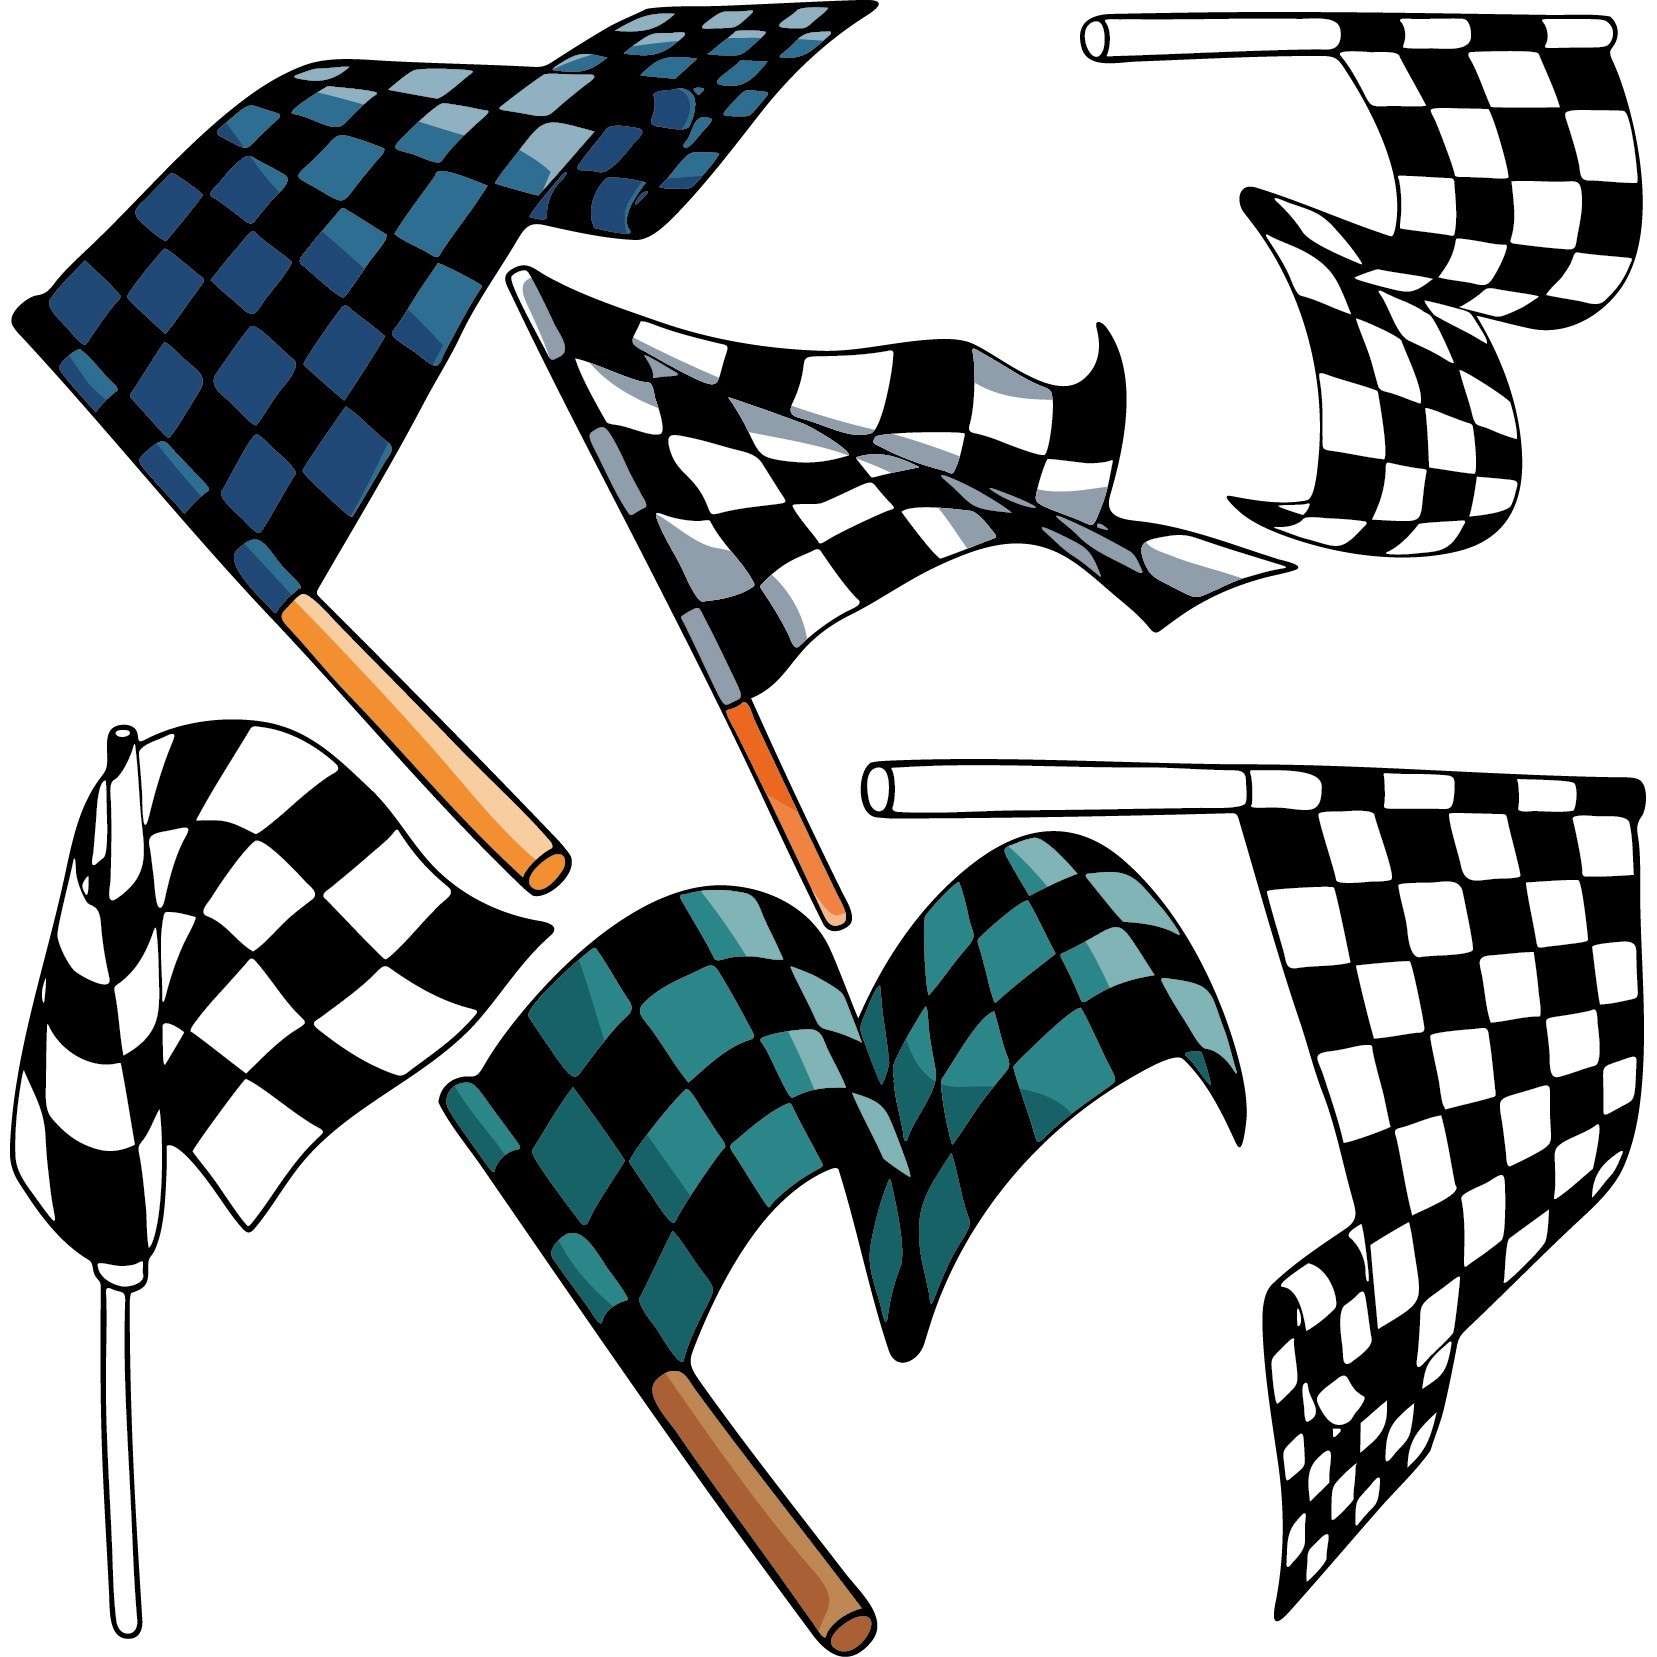 Checkered flags 01